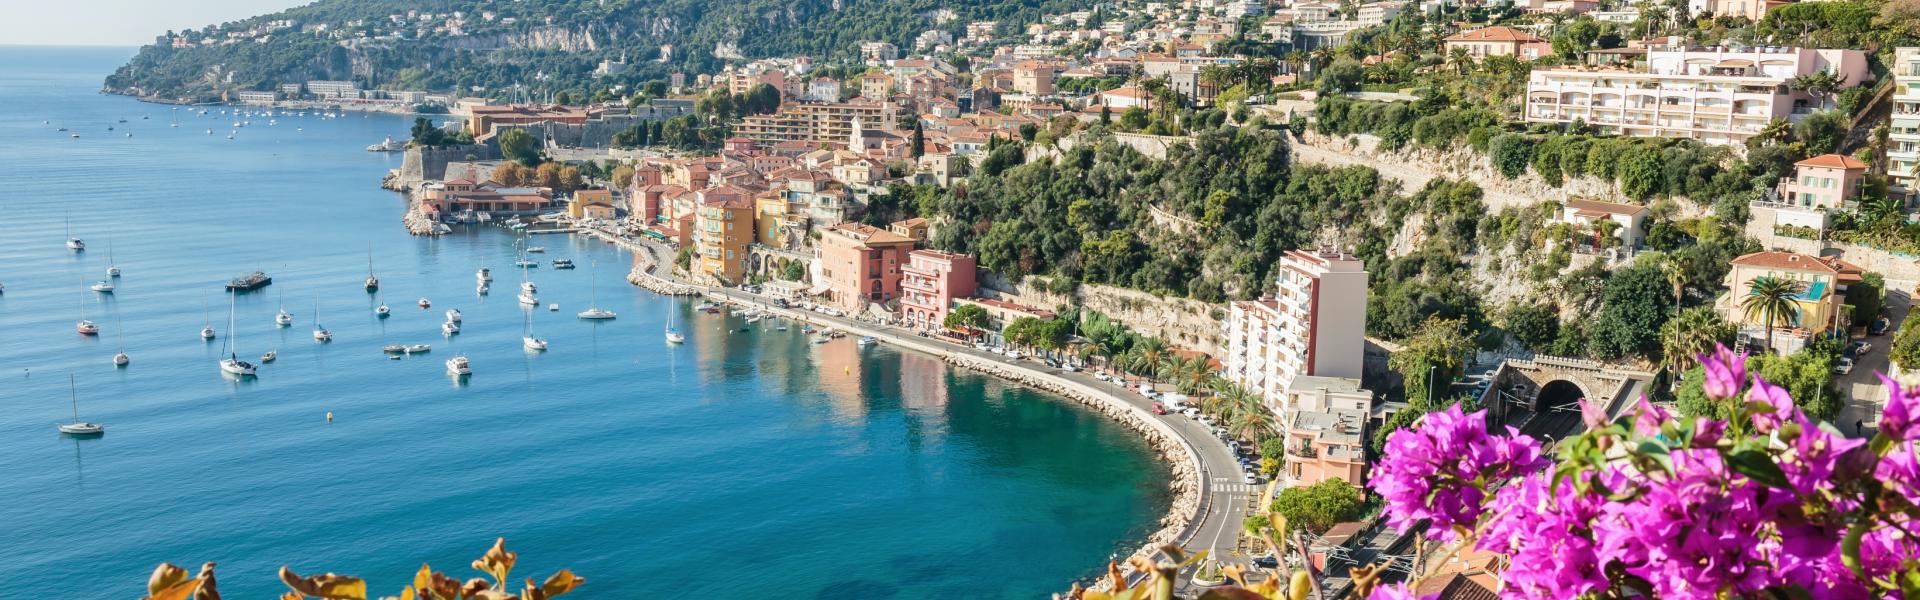 Find the perfect vacation home in French Riviera - Casamundo